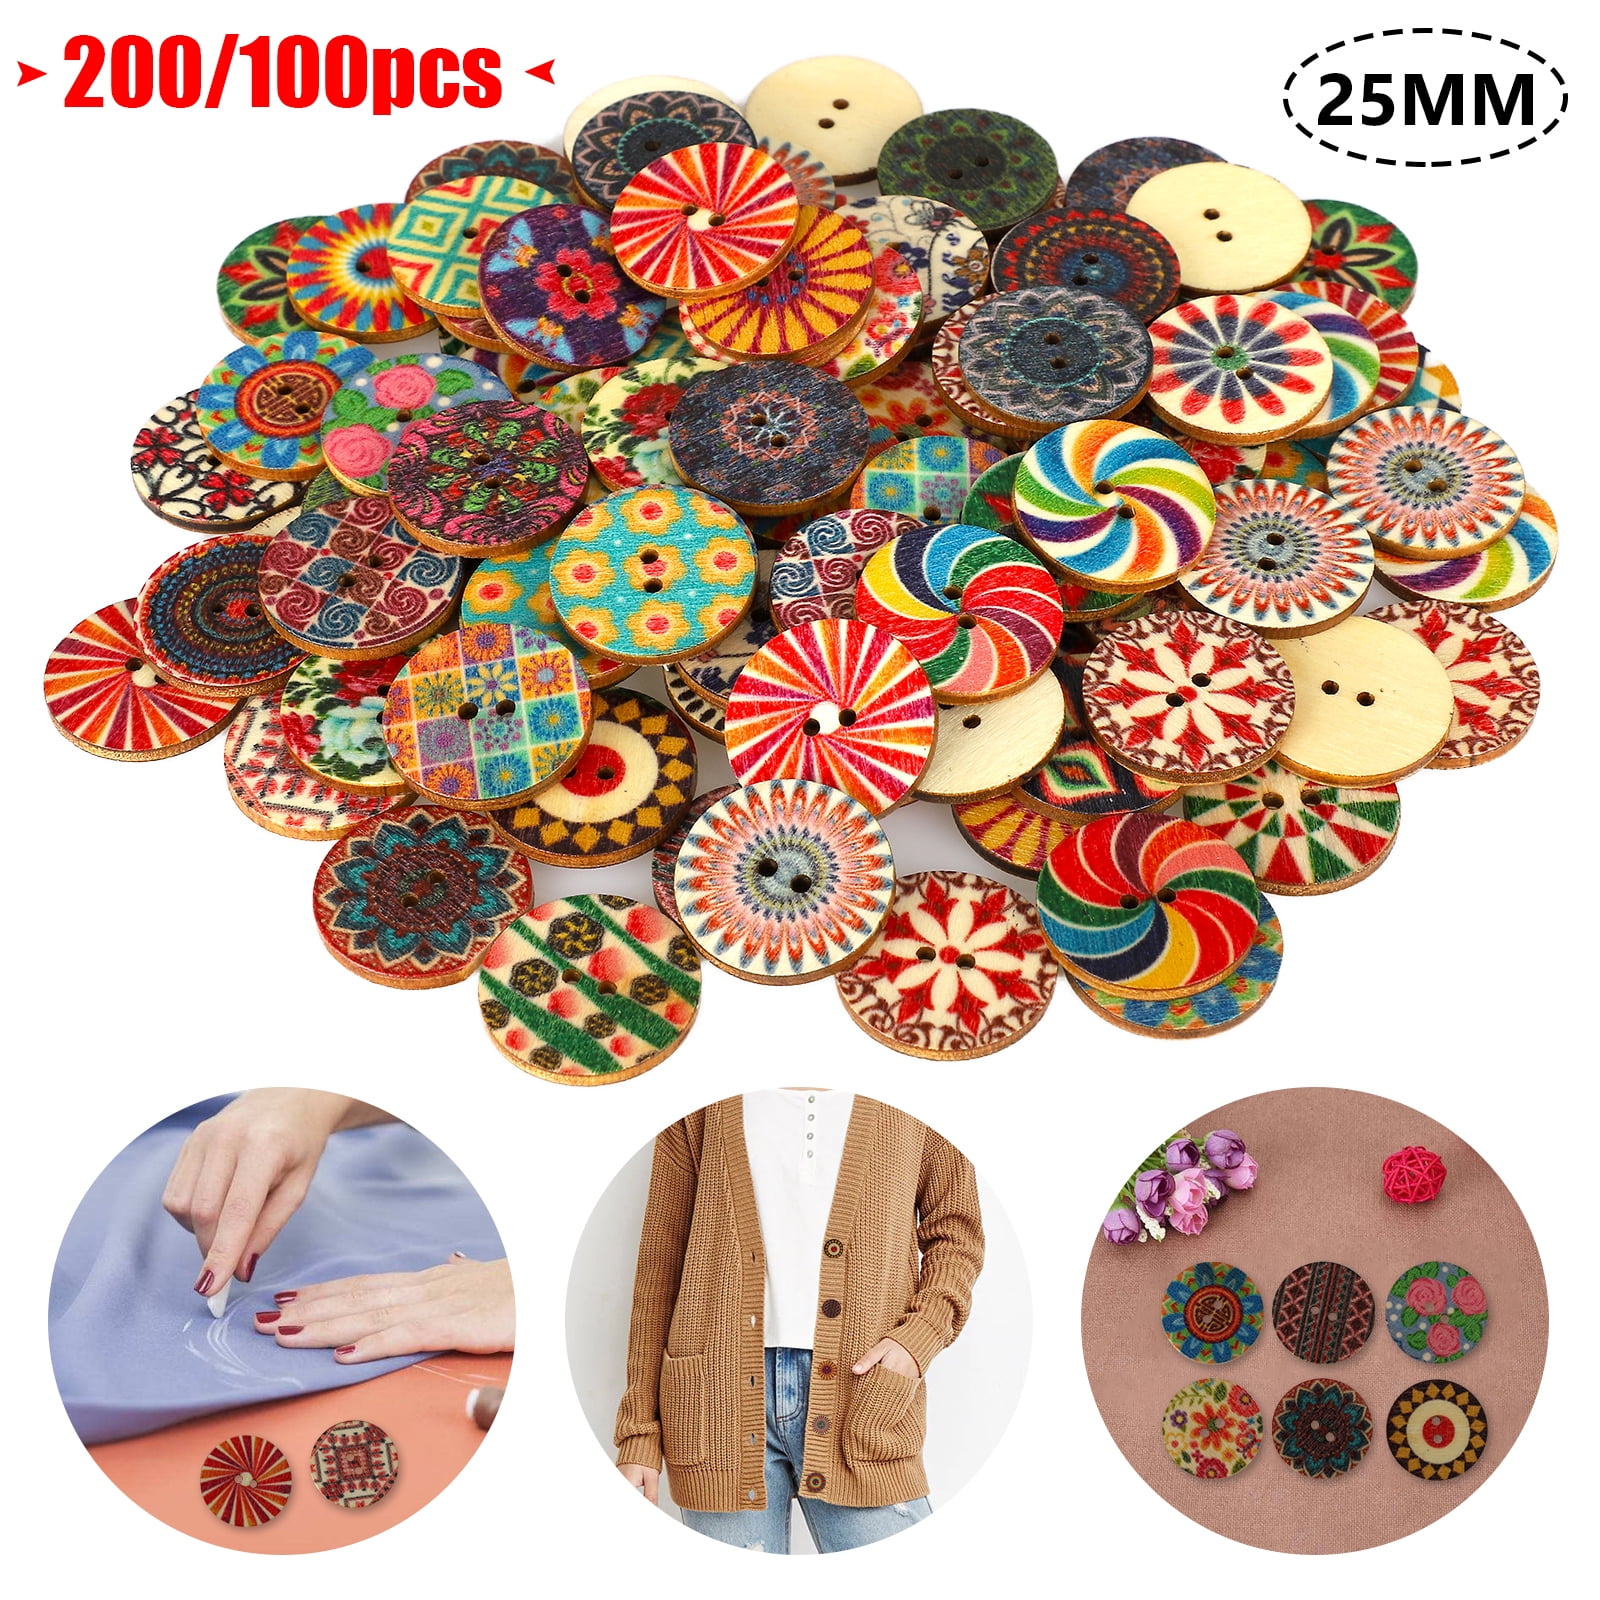 Wooden Buttons 20mm Dedoot 100 Pcs Natural Wood 4 Hole Buttons Sewing Buttons Decorative for Craft DIY Scrapbook Decor 